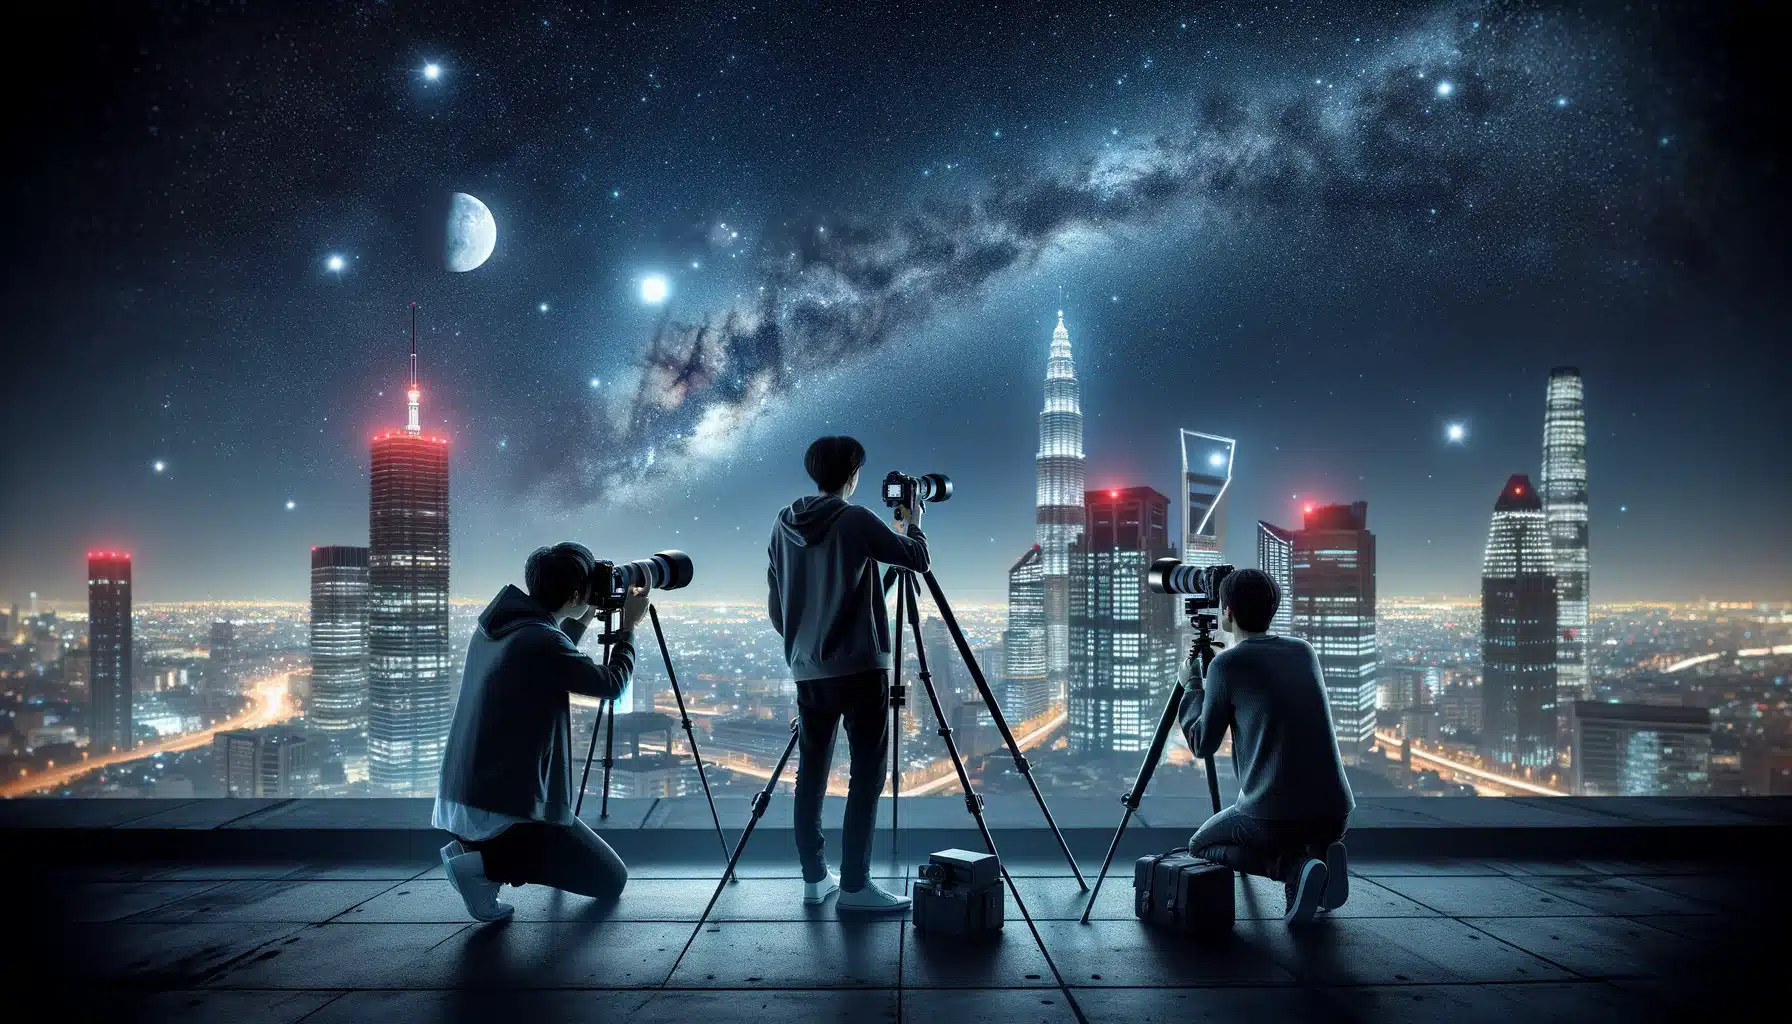 Three photographers on a city rooftop at night using tripods to capture images where the bright cityscape meets the starry sky.